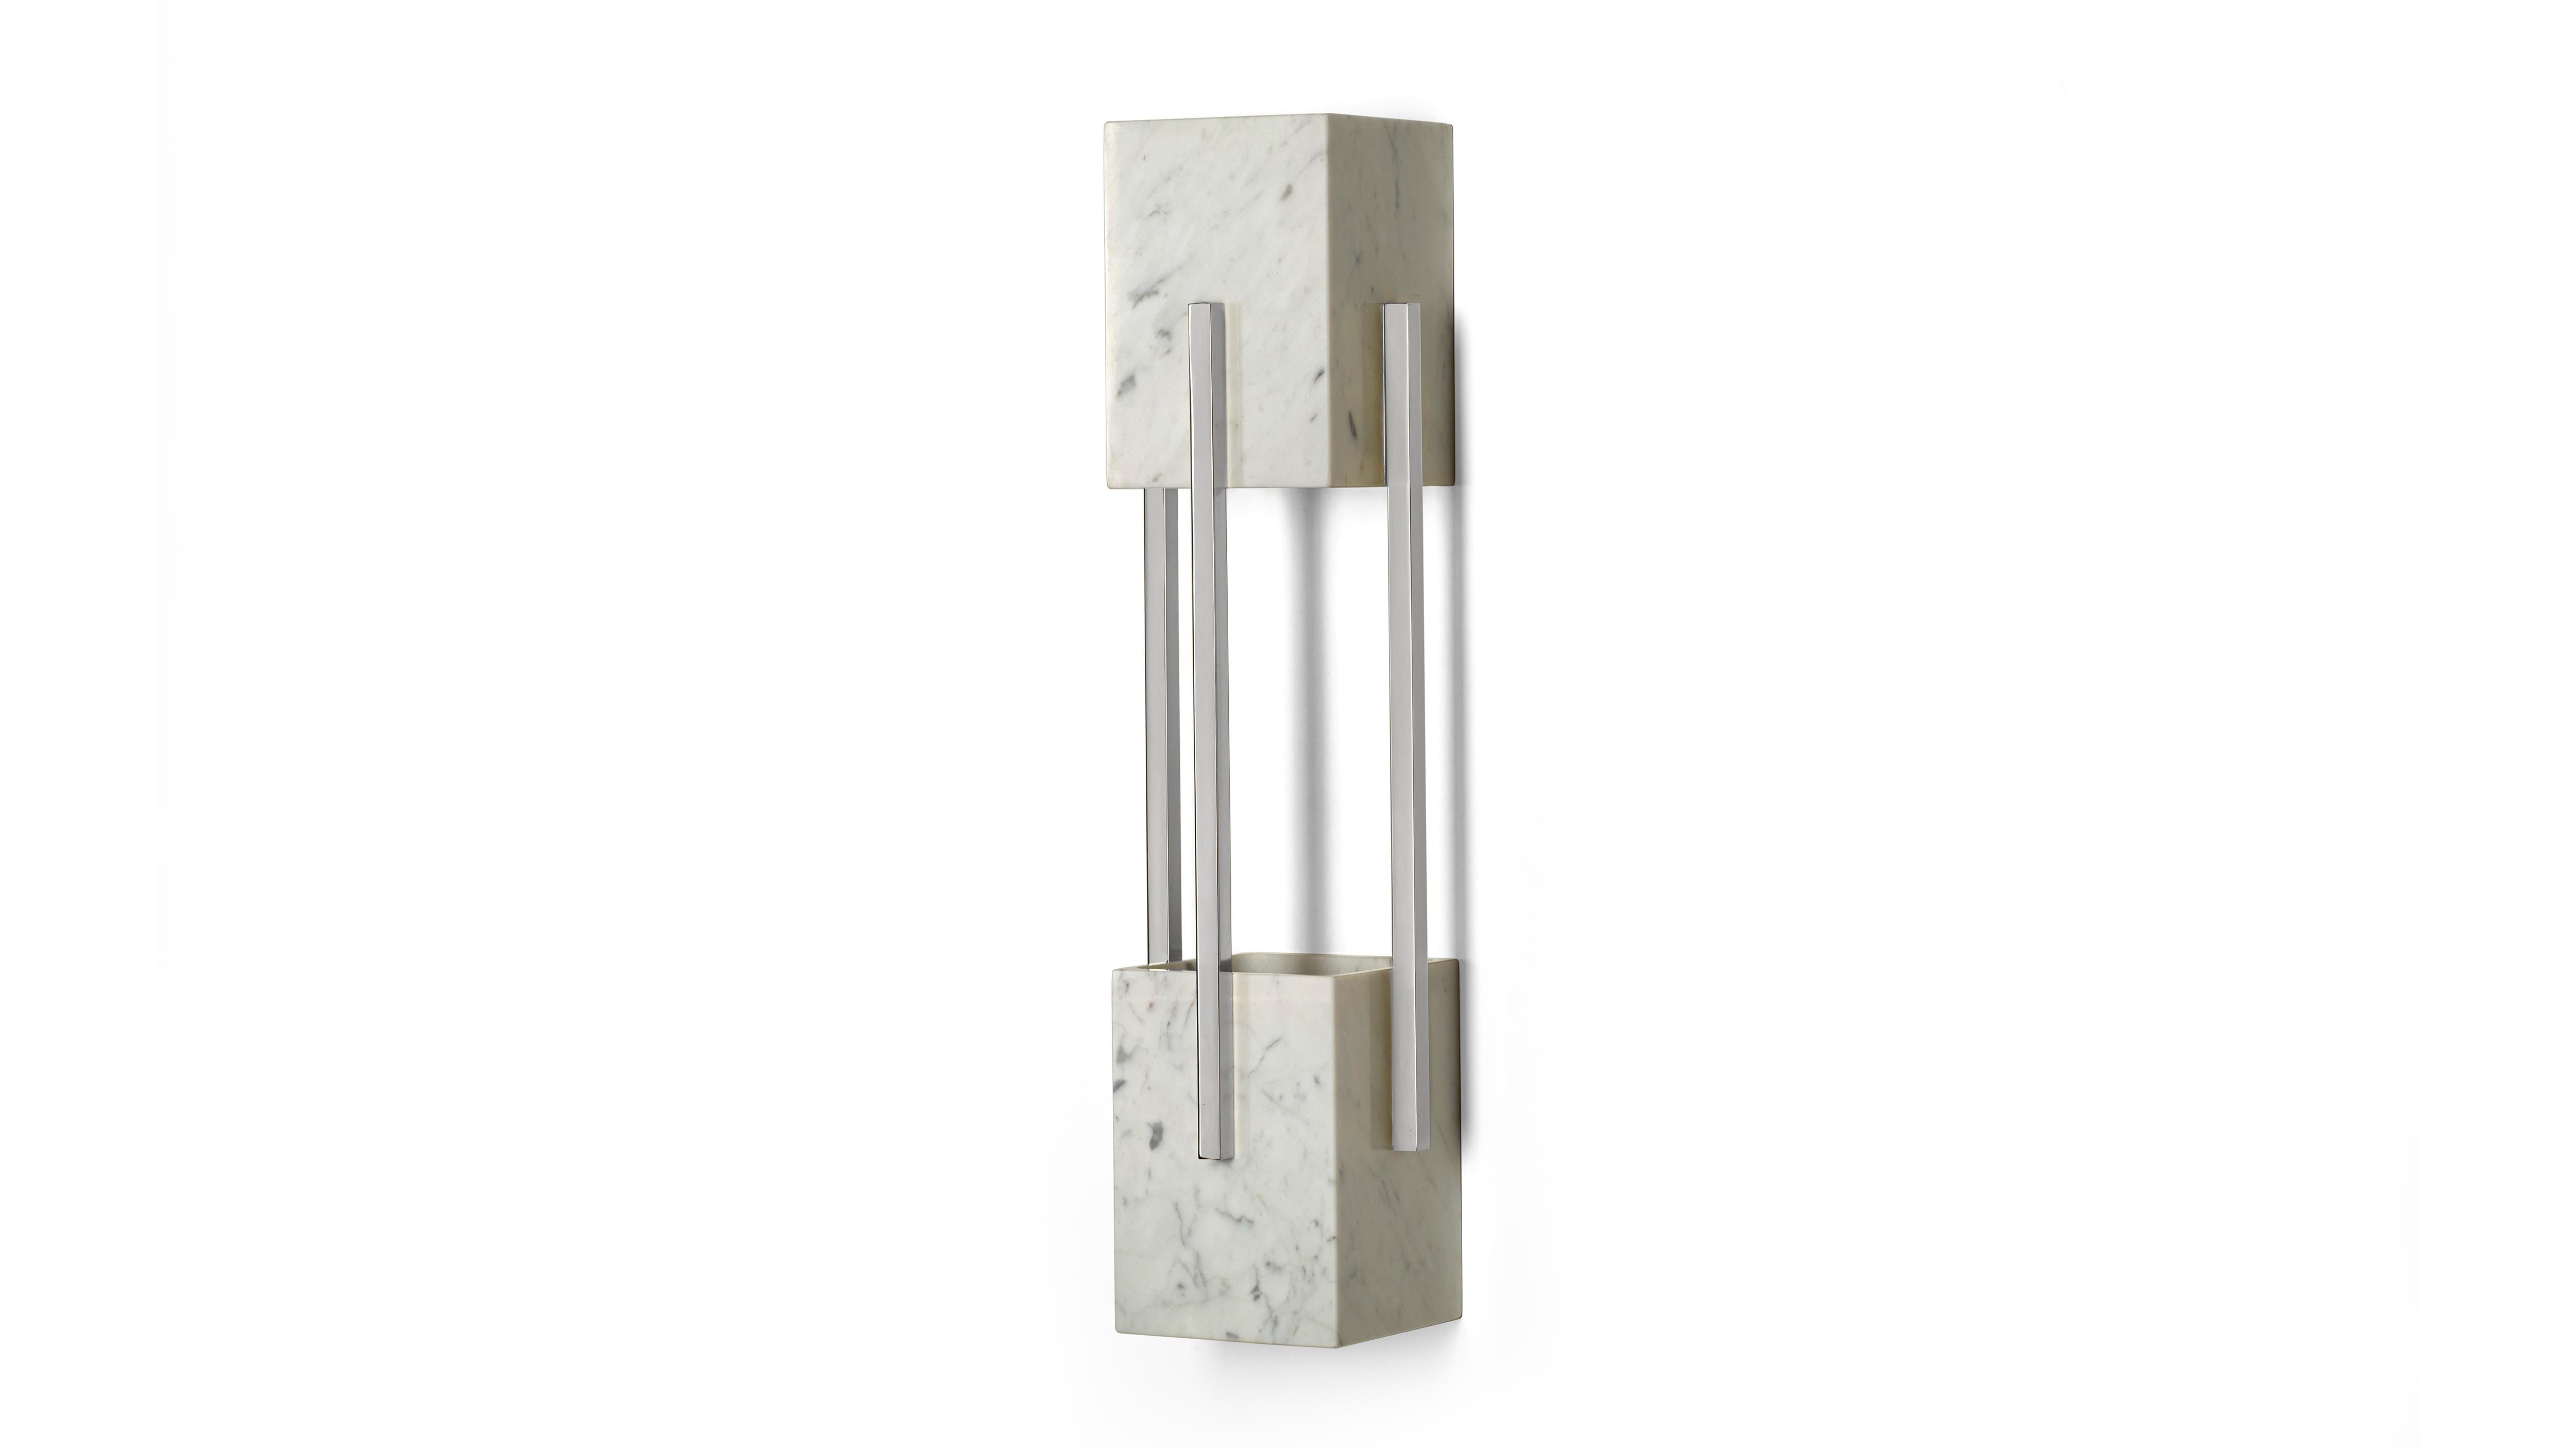 Looshaus Carrara Marble and Nickel Wall Lamp by InsidherLand
Dimensions: D 13 x W 14 x H 56 cm.
Materials: Carrara marble, polished nickel.
3.5 kg.
Available in other marbles and metals.

The Looshaus building by Architect Adolf Loos in Vienna